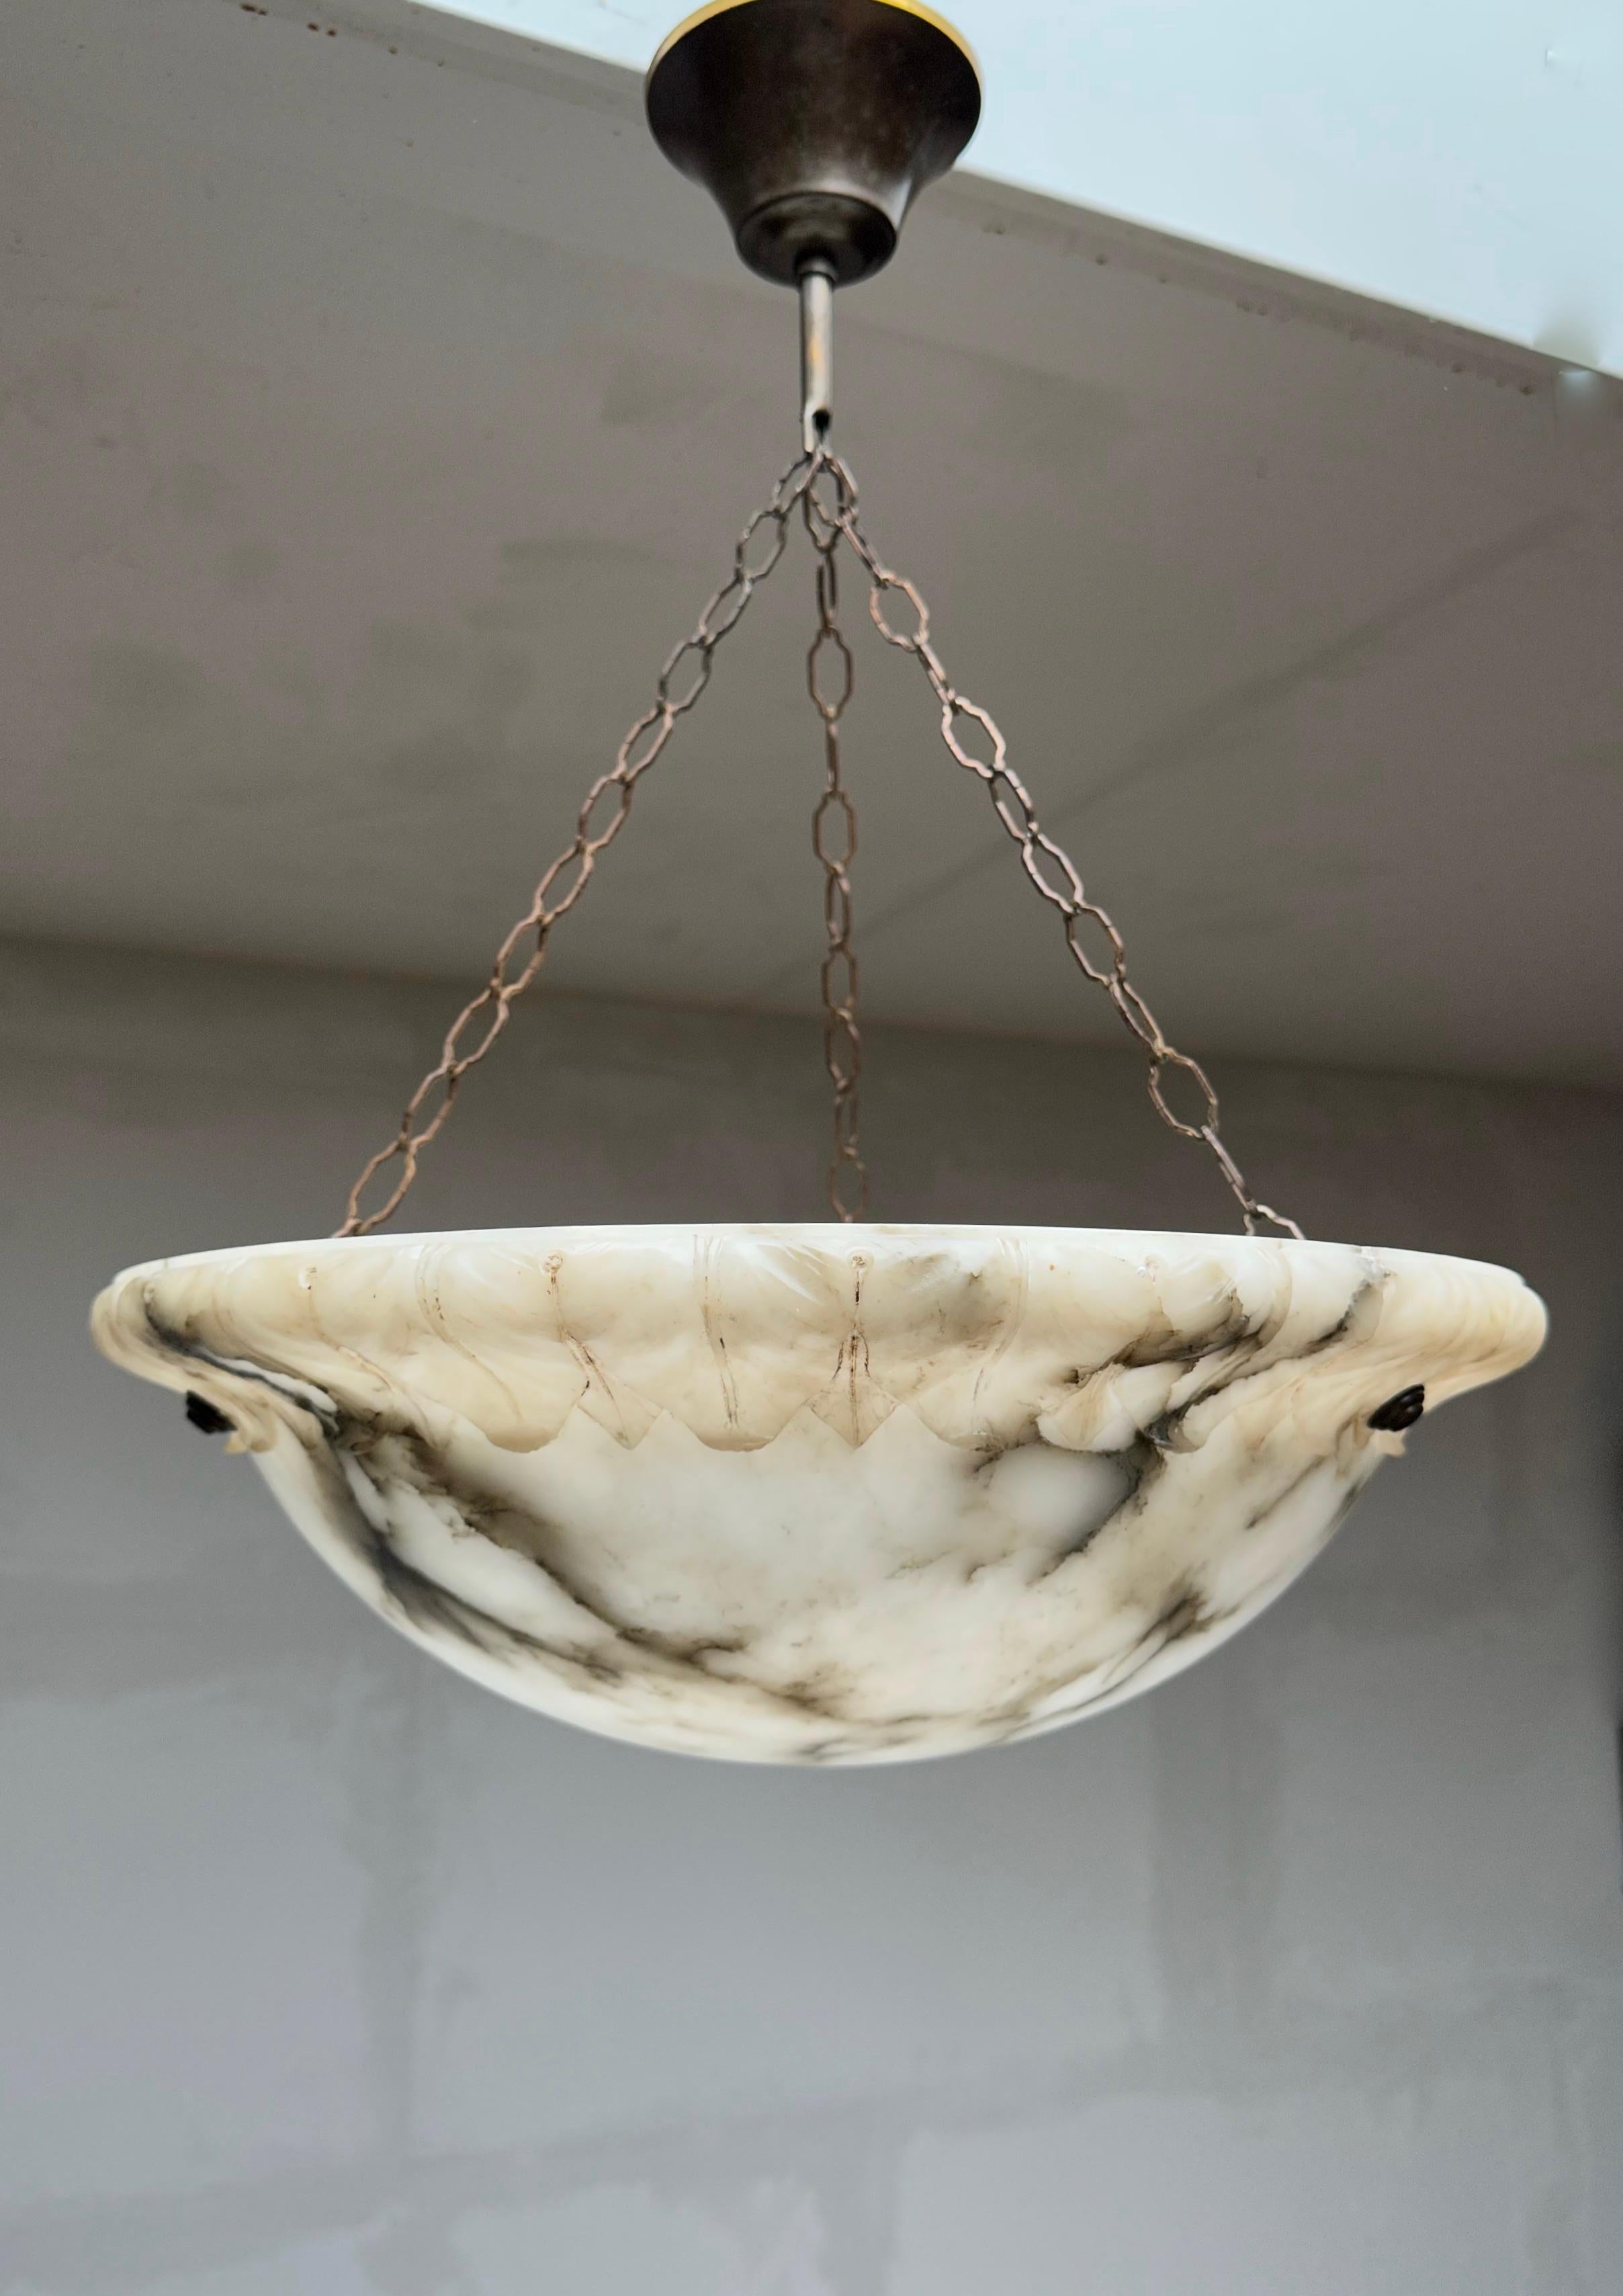 Superb condition chandelier with a stunning and good size alabaster mineral stone shade.

Thanks to it size, deep shape and remarkable design this alabaster chandelier will light up both your days and evenings. It is in excellent condition from